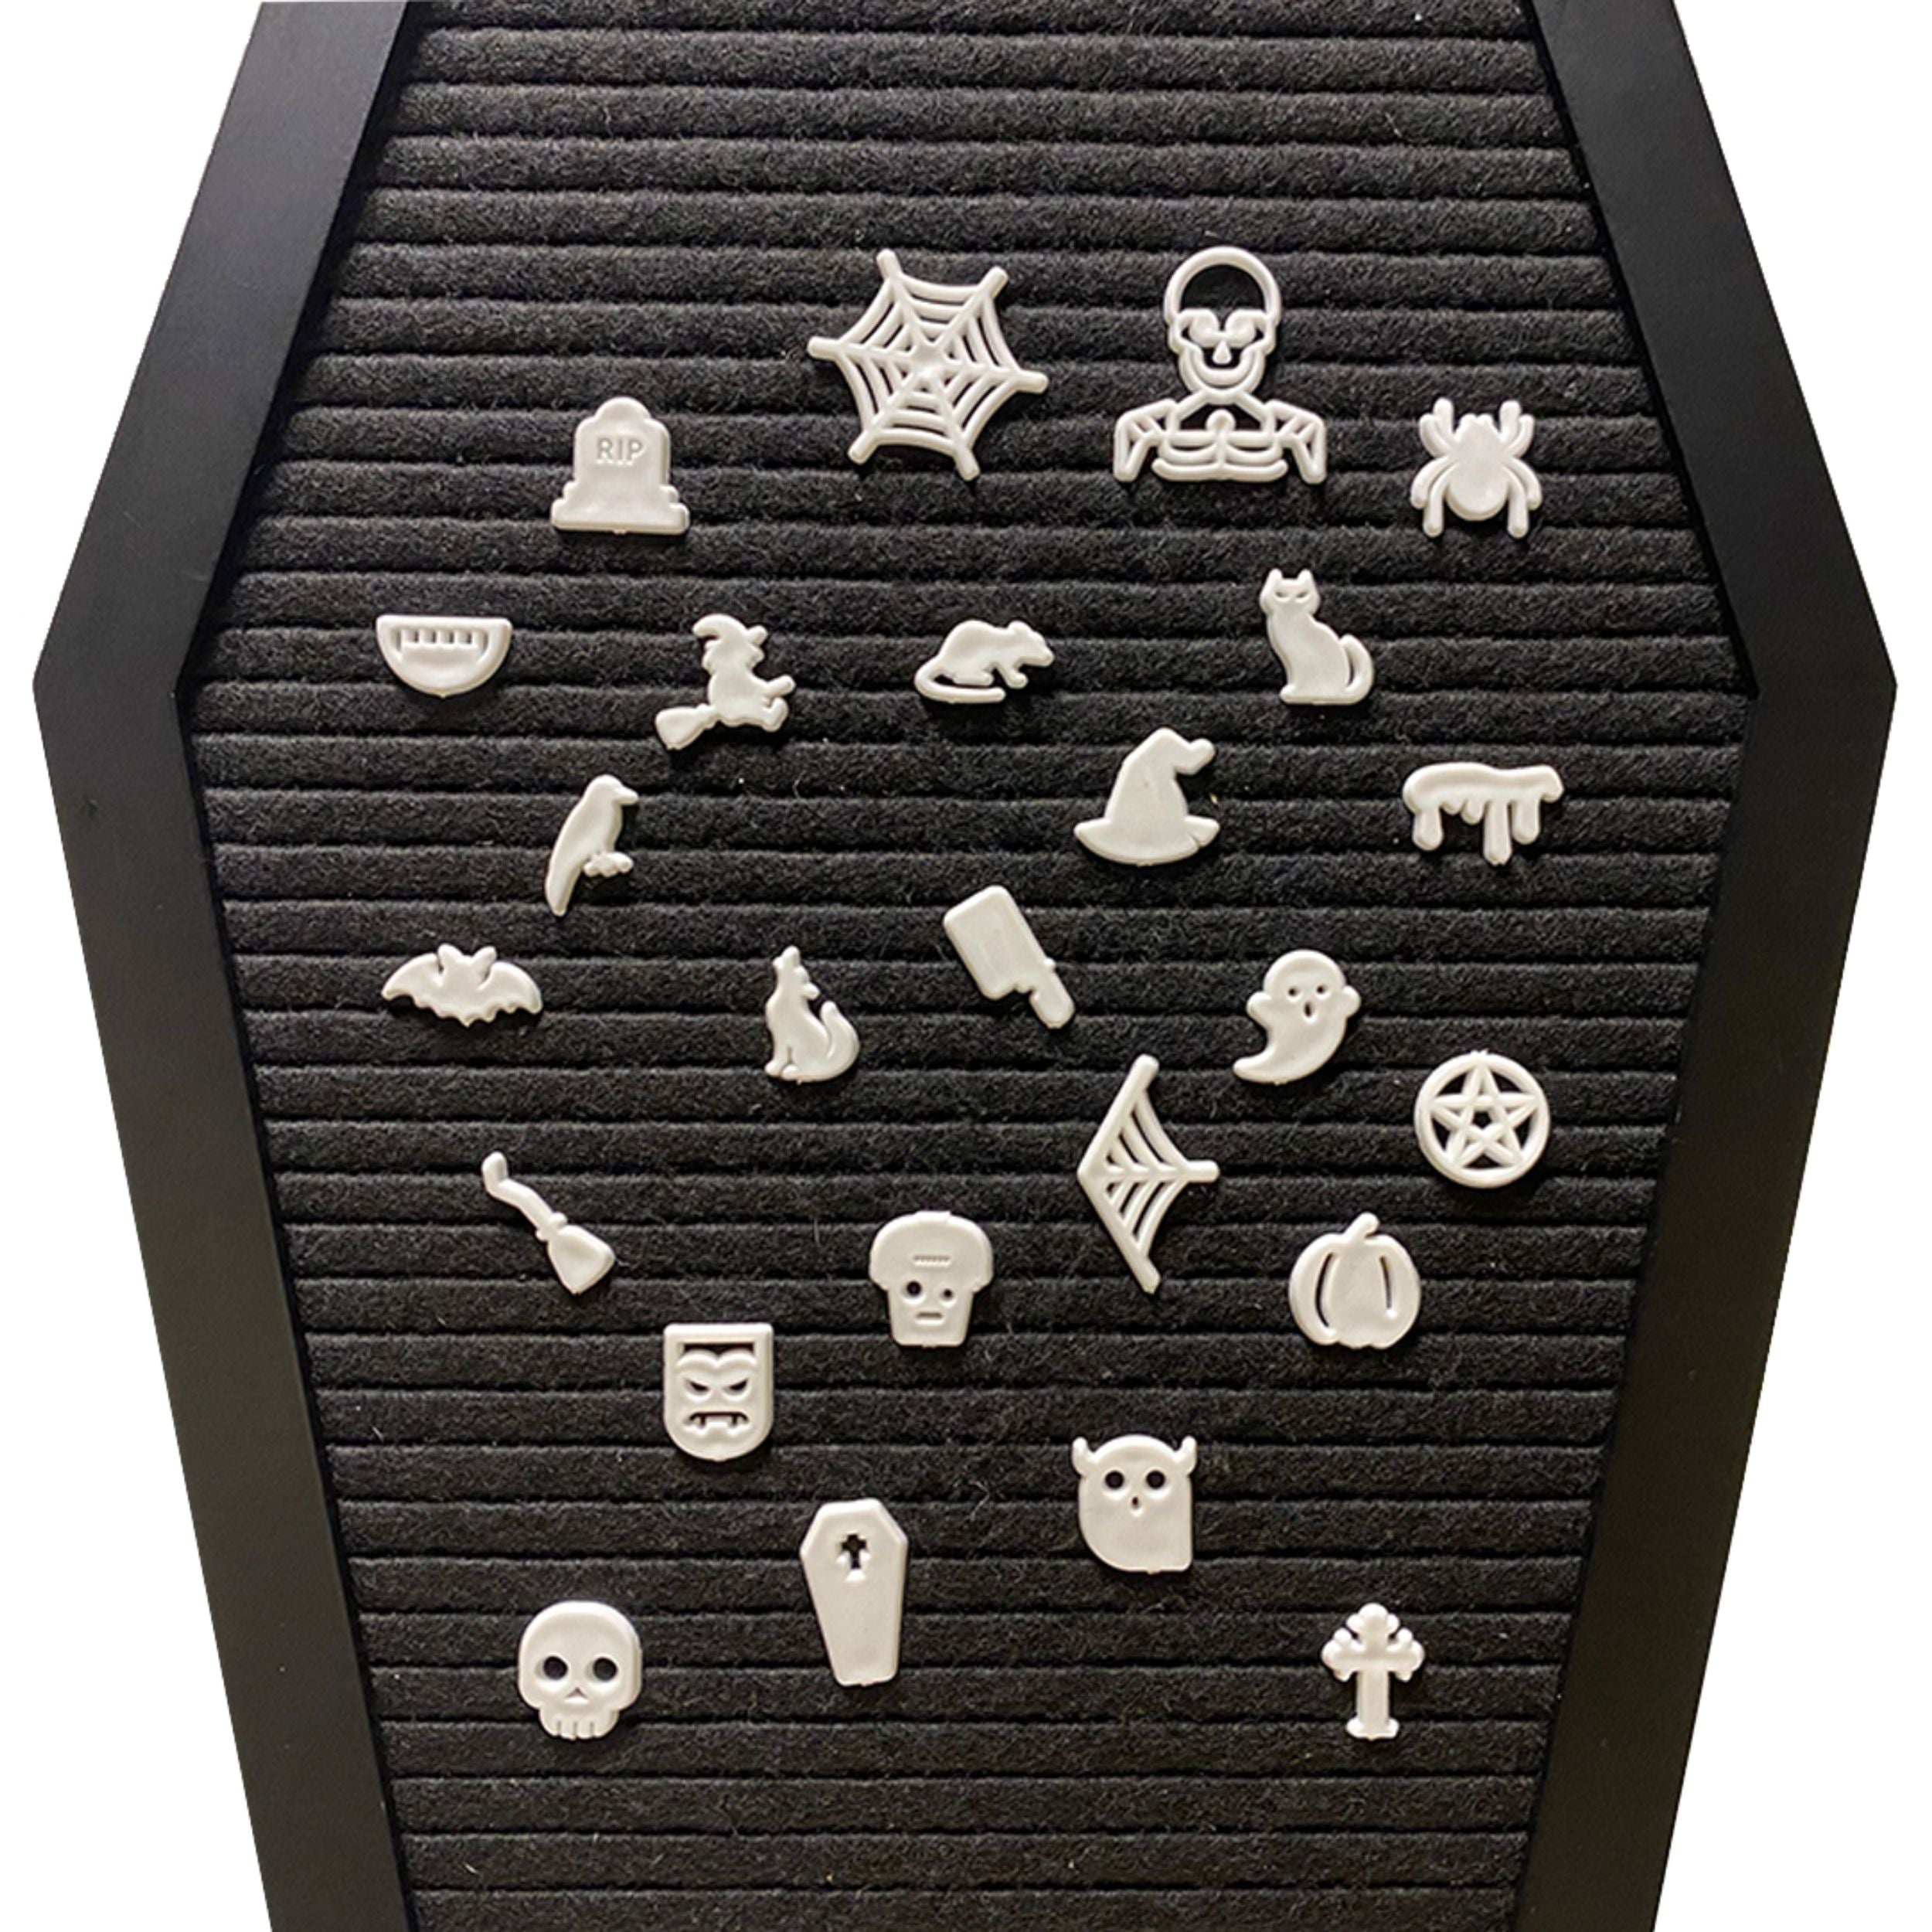 Spooky Letter Board Characters - Board NOT Included - +80pcs Felt Message Board Accessories - Shapes Include: Pumpkin, Coffin, Skeleton, Skull, Spider, Bat, Witch Hat, Broom